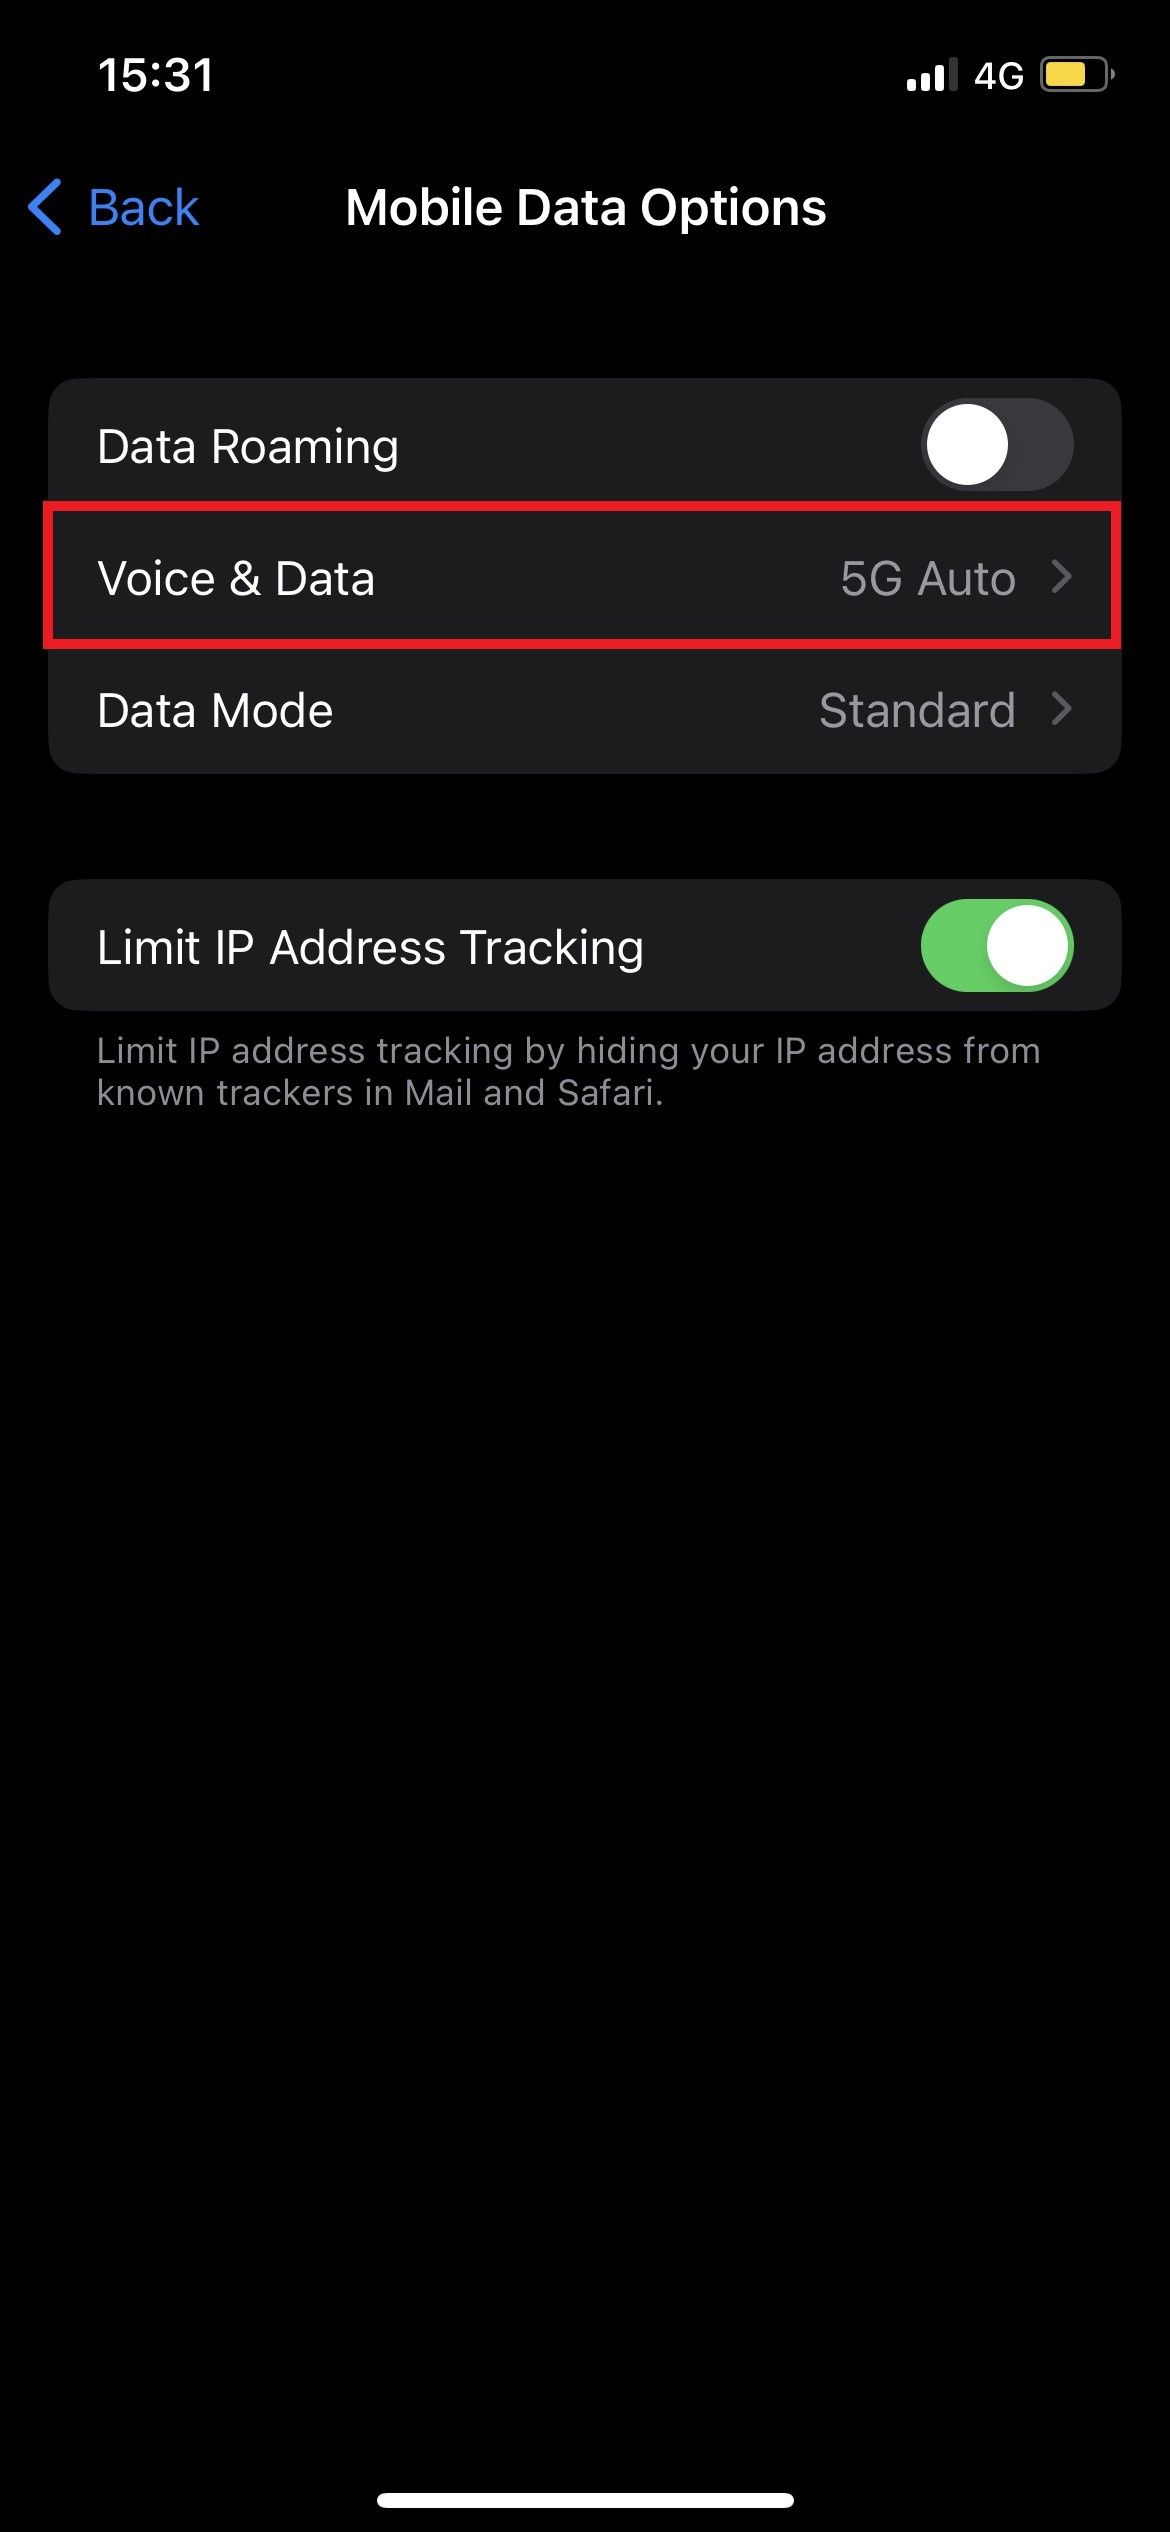 a screen within Settings showing configurable options for mobile data